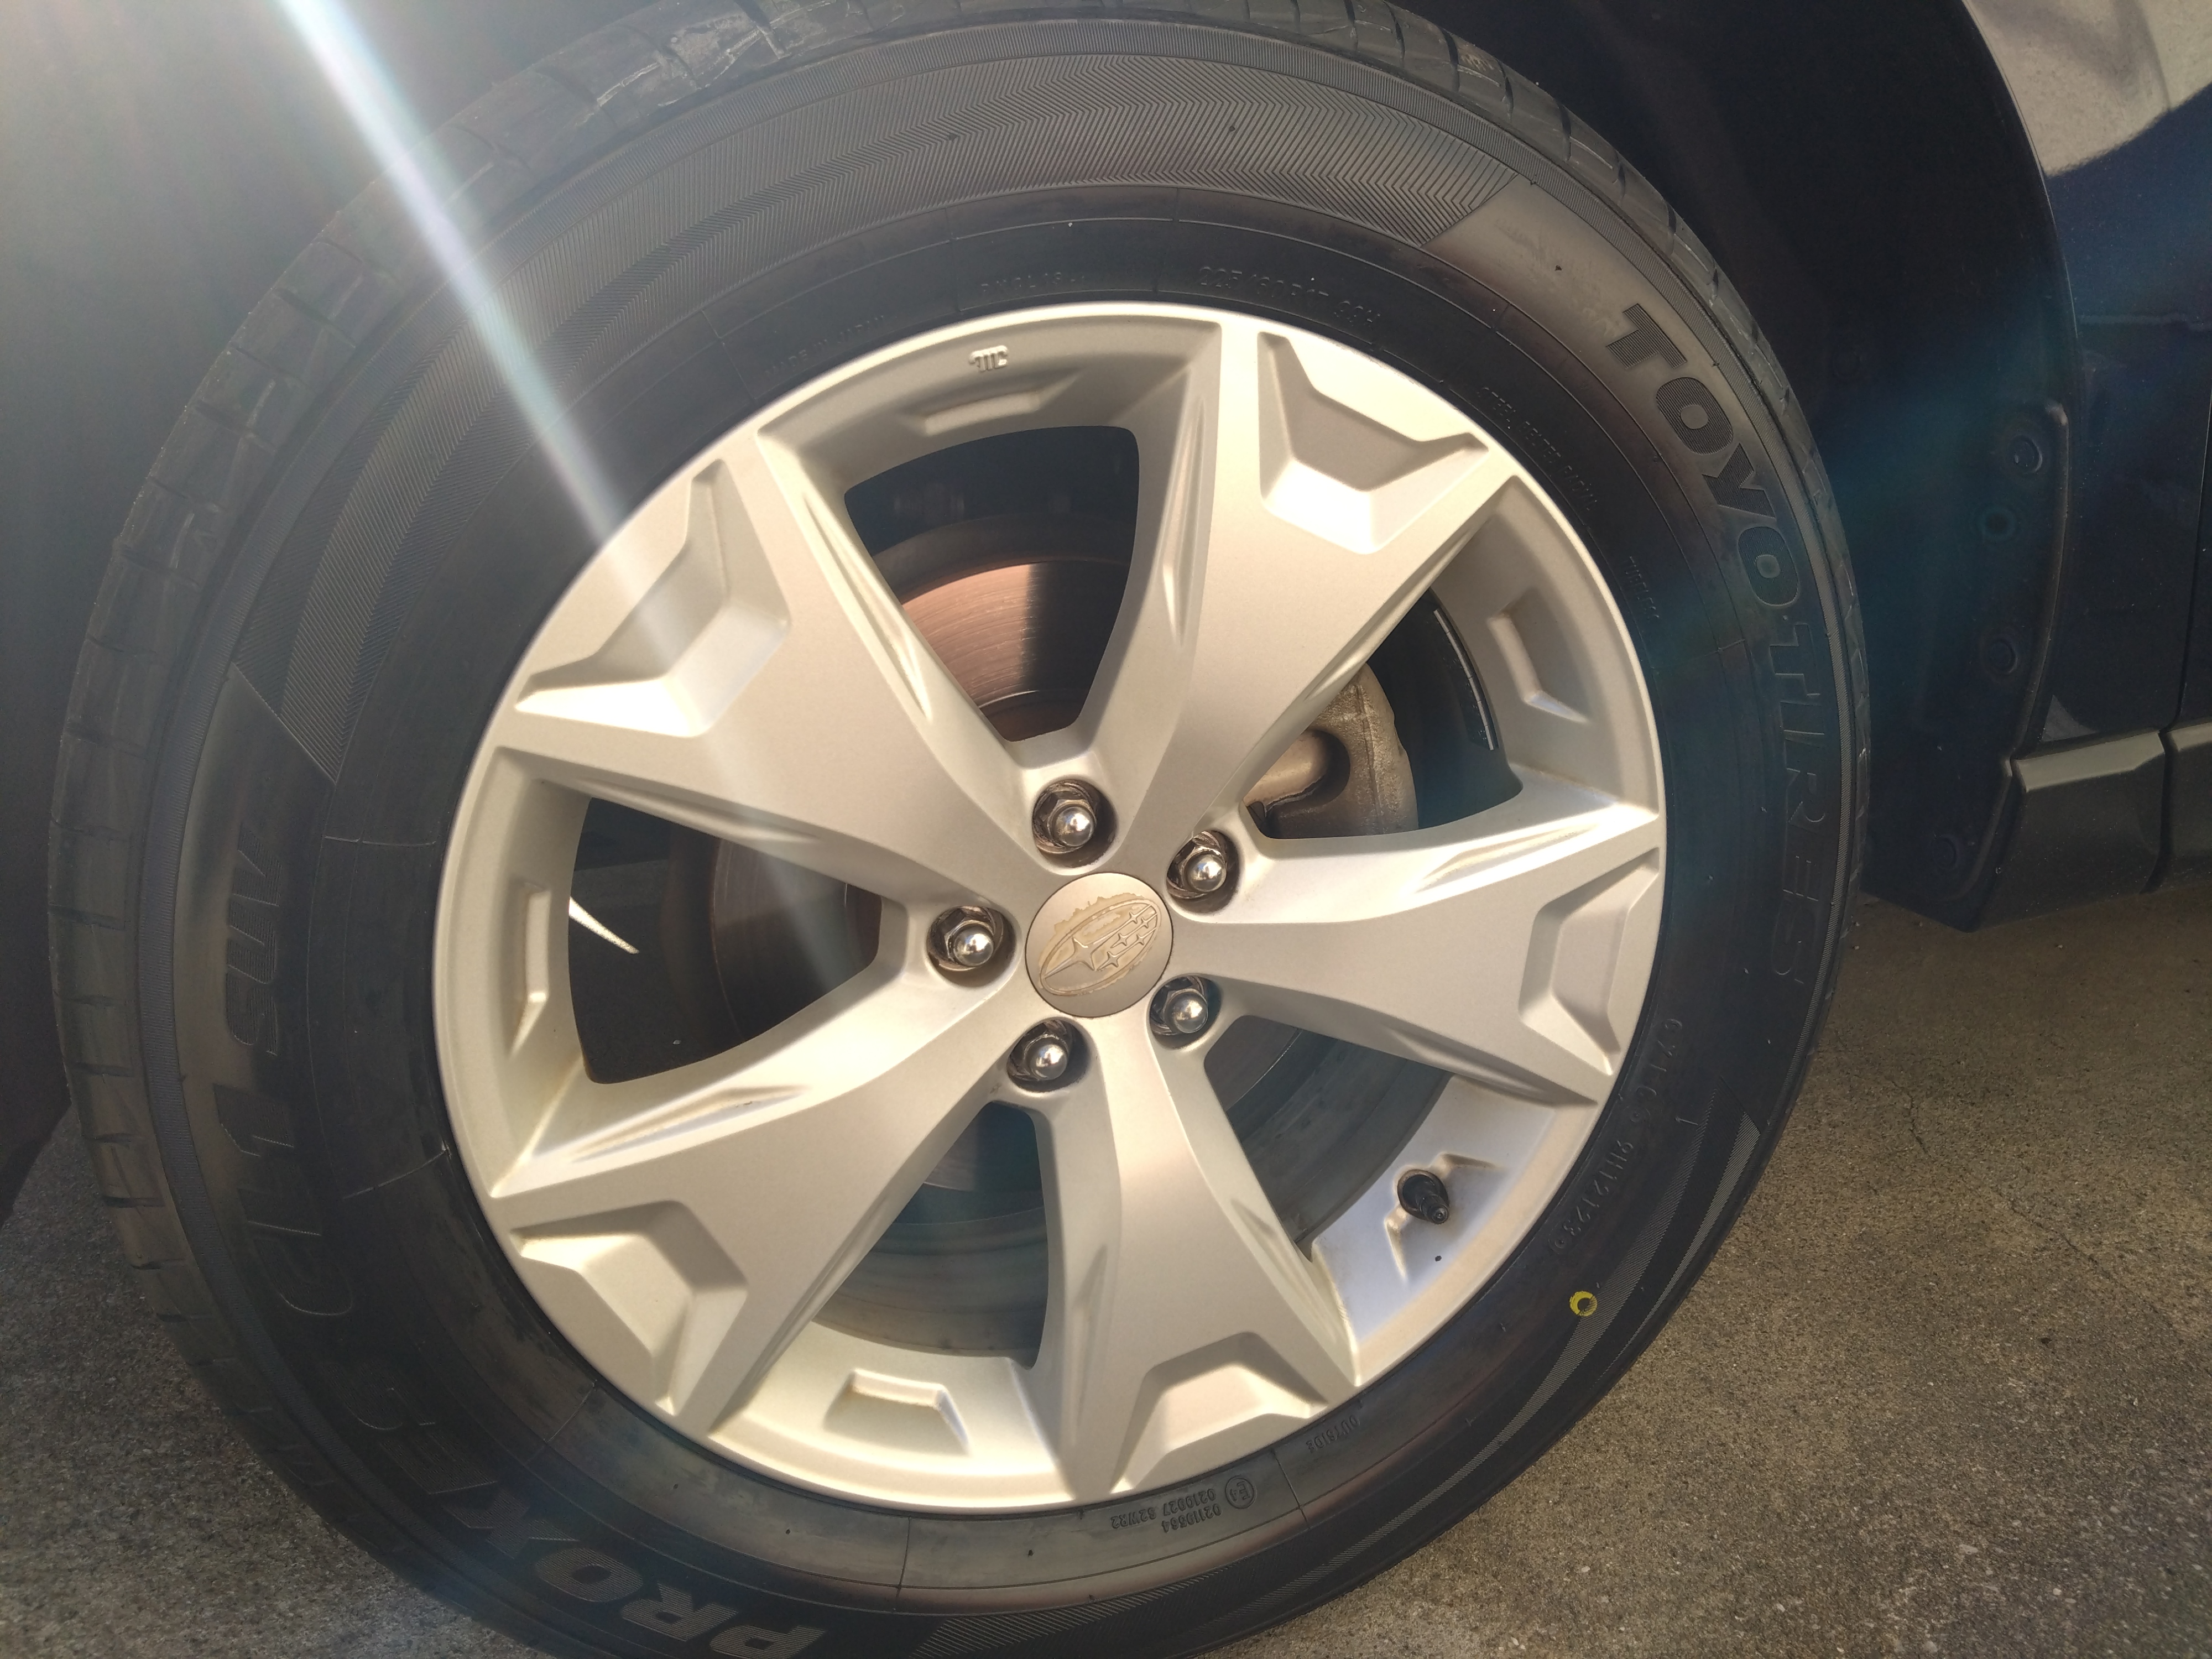 TOYOTIRE PROXES CL1SUVのレビュー投稿画像